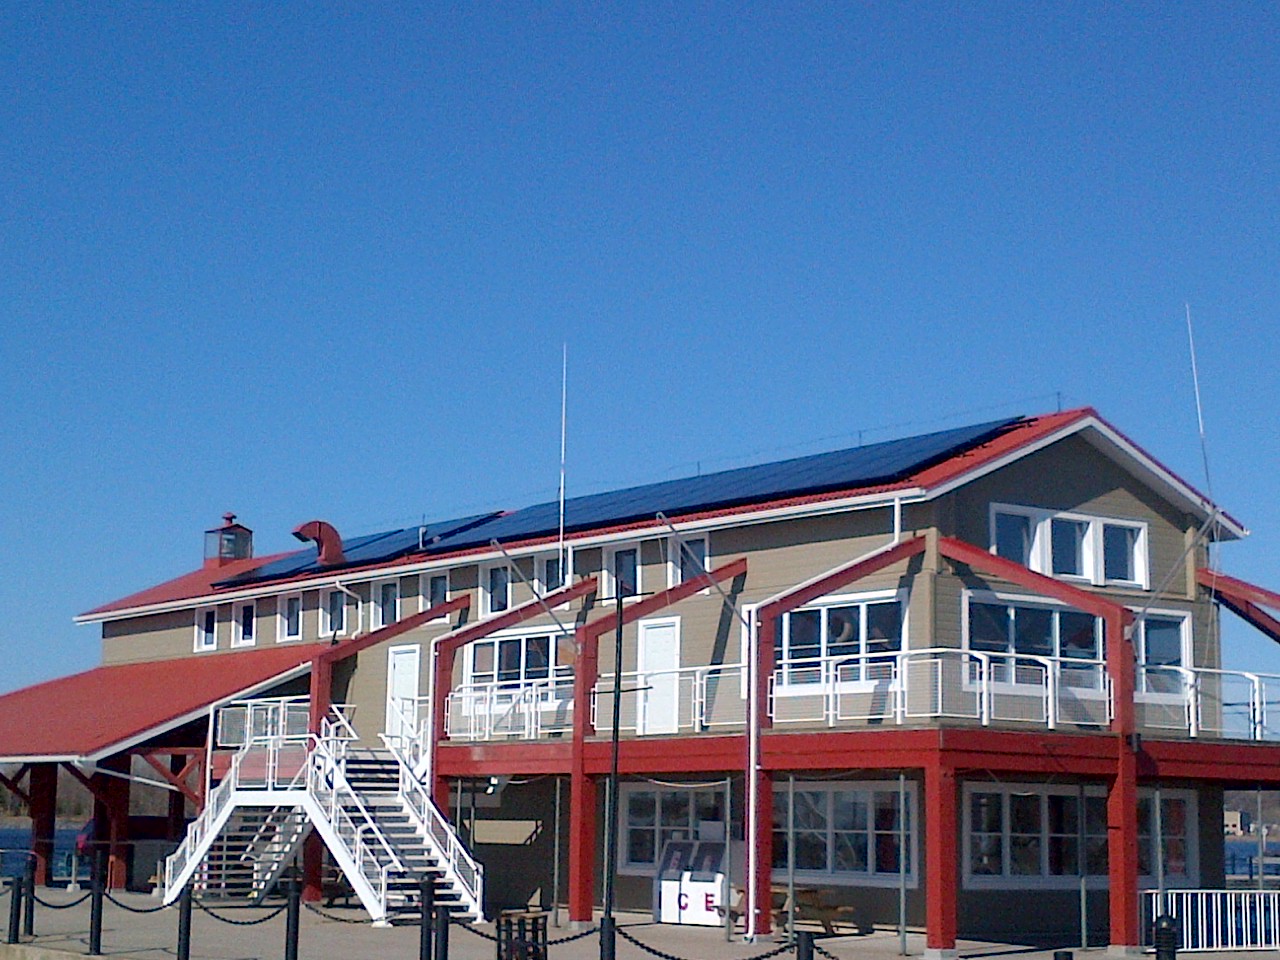 Rooftop solar panels at Meyers Pier